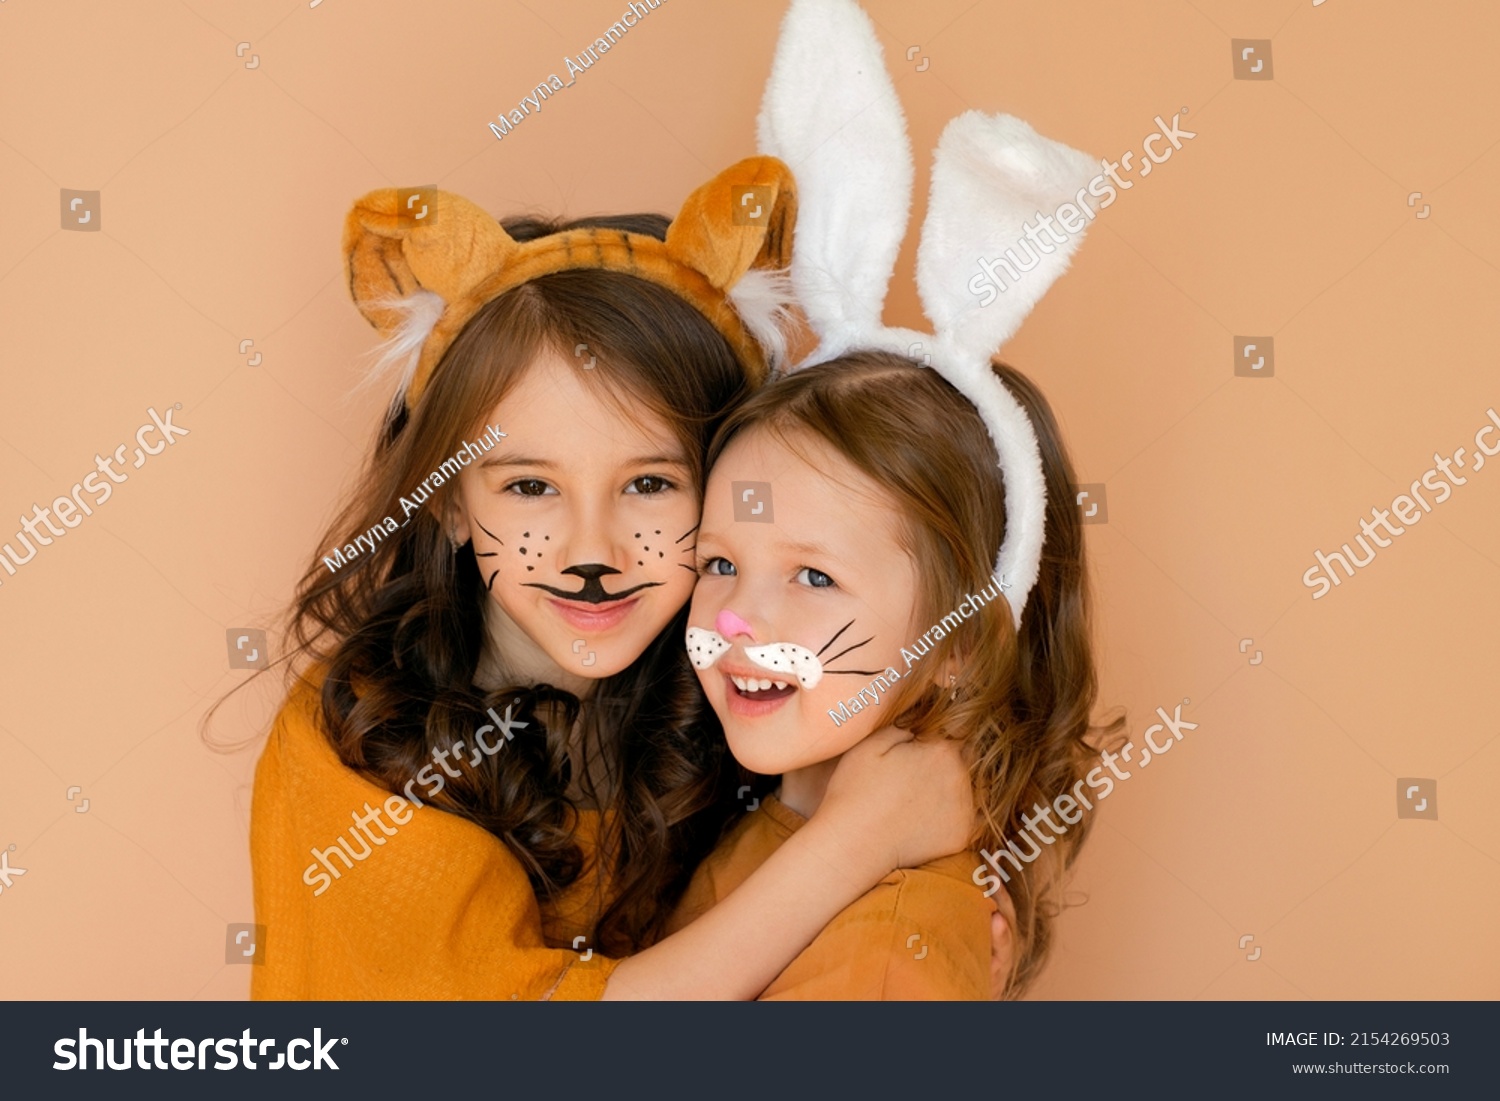 Kids with painted faces in guise of rabbit and tiger. Zodiac 2023 year according to Chinese calendar. Girl dressed up with bunny ears and makeup in anticipation new year. Symbol outgoing old year 2022 #2154269503